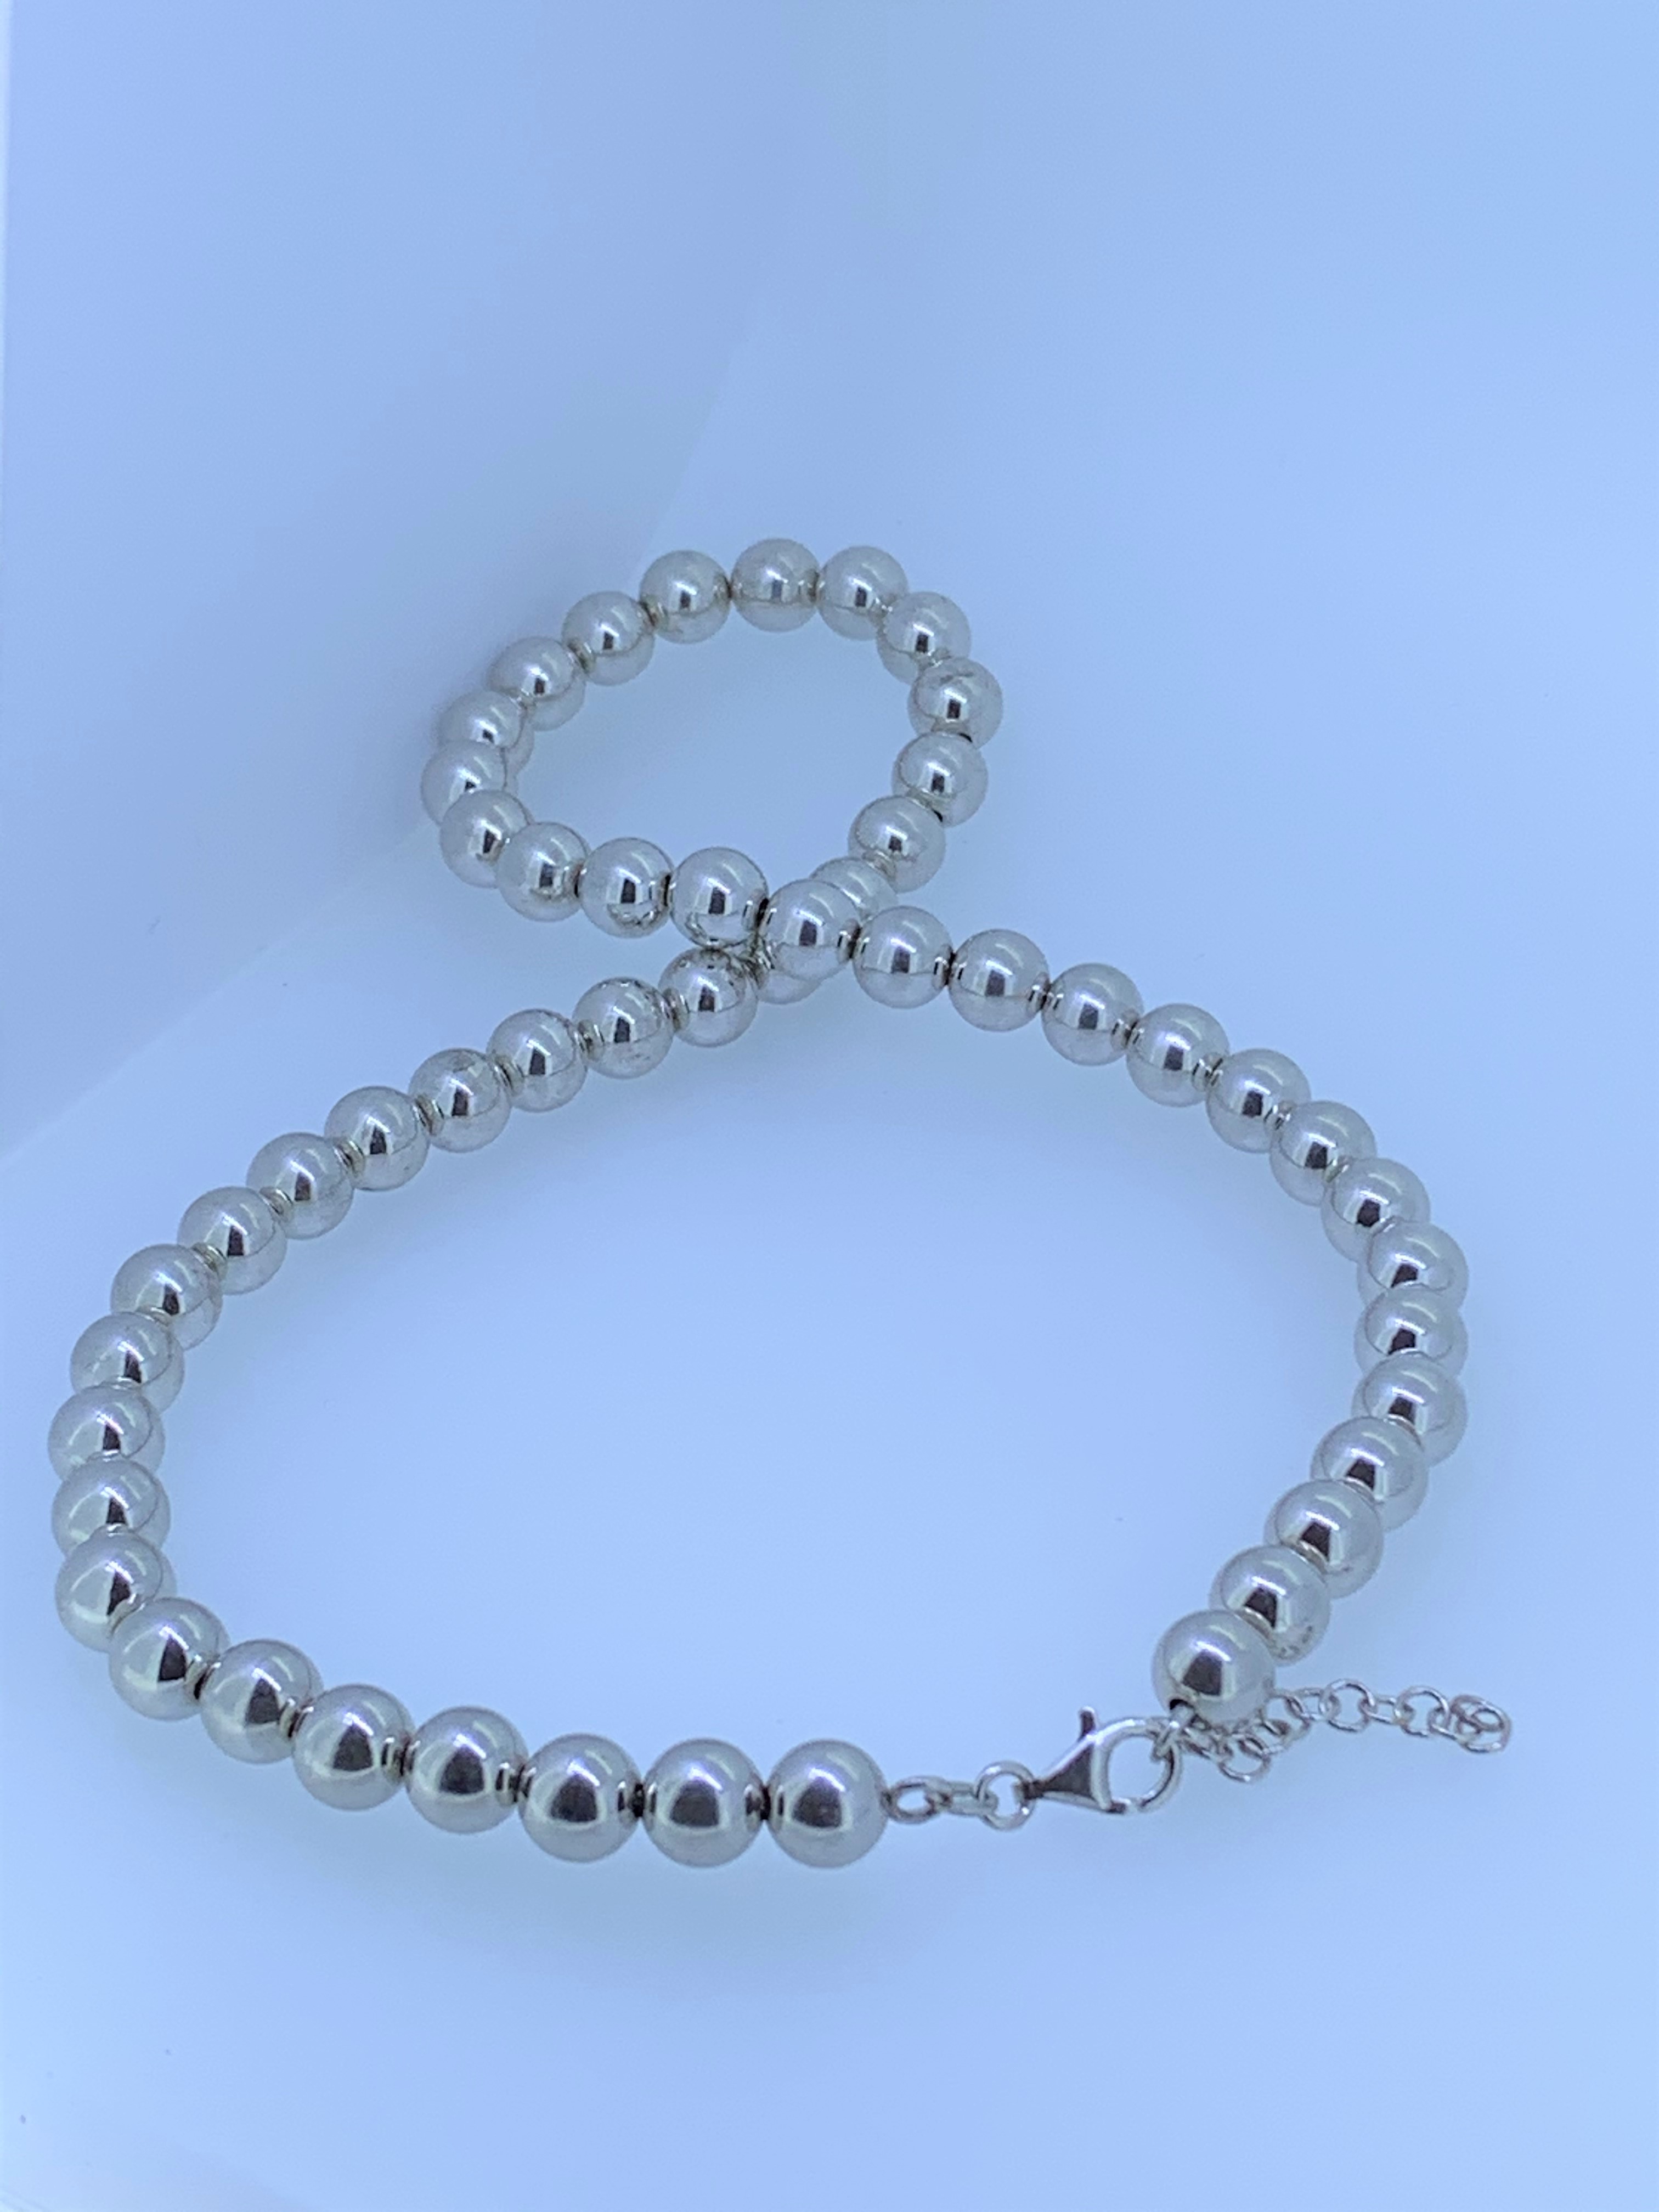 925 silver bead necklace upt 18 inch lngth - Image 2 of 2